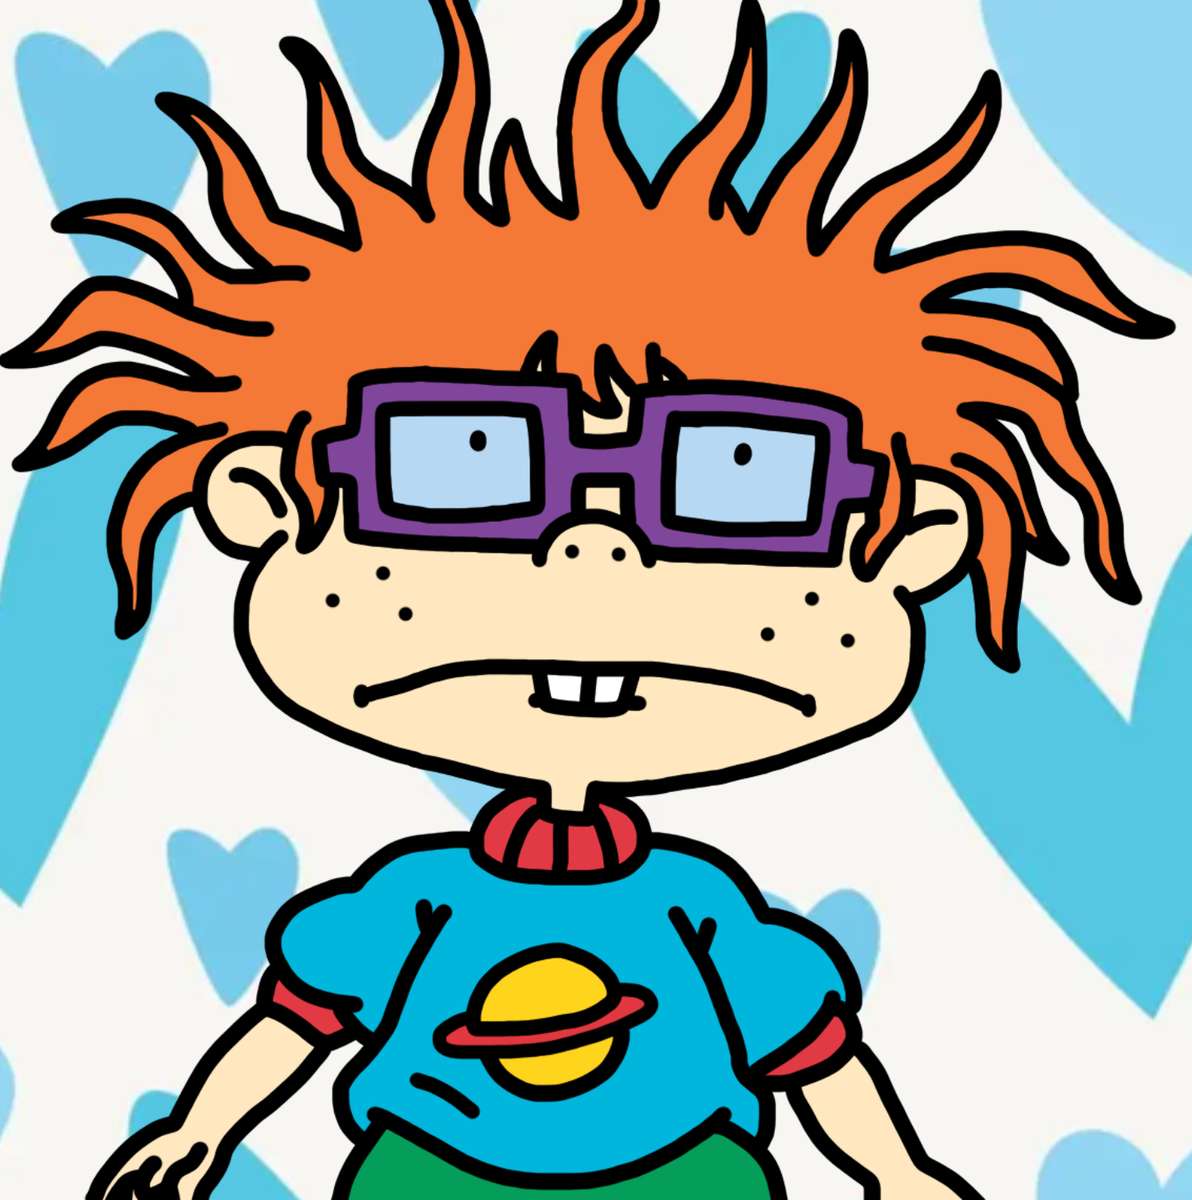 Rugrats Chuckie Finster online puzzle